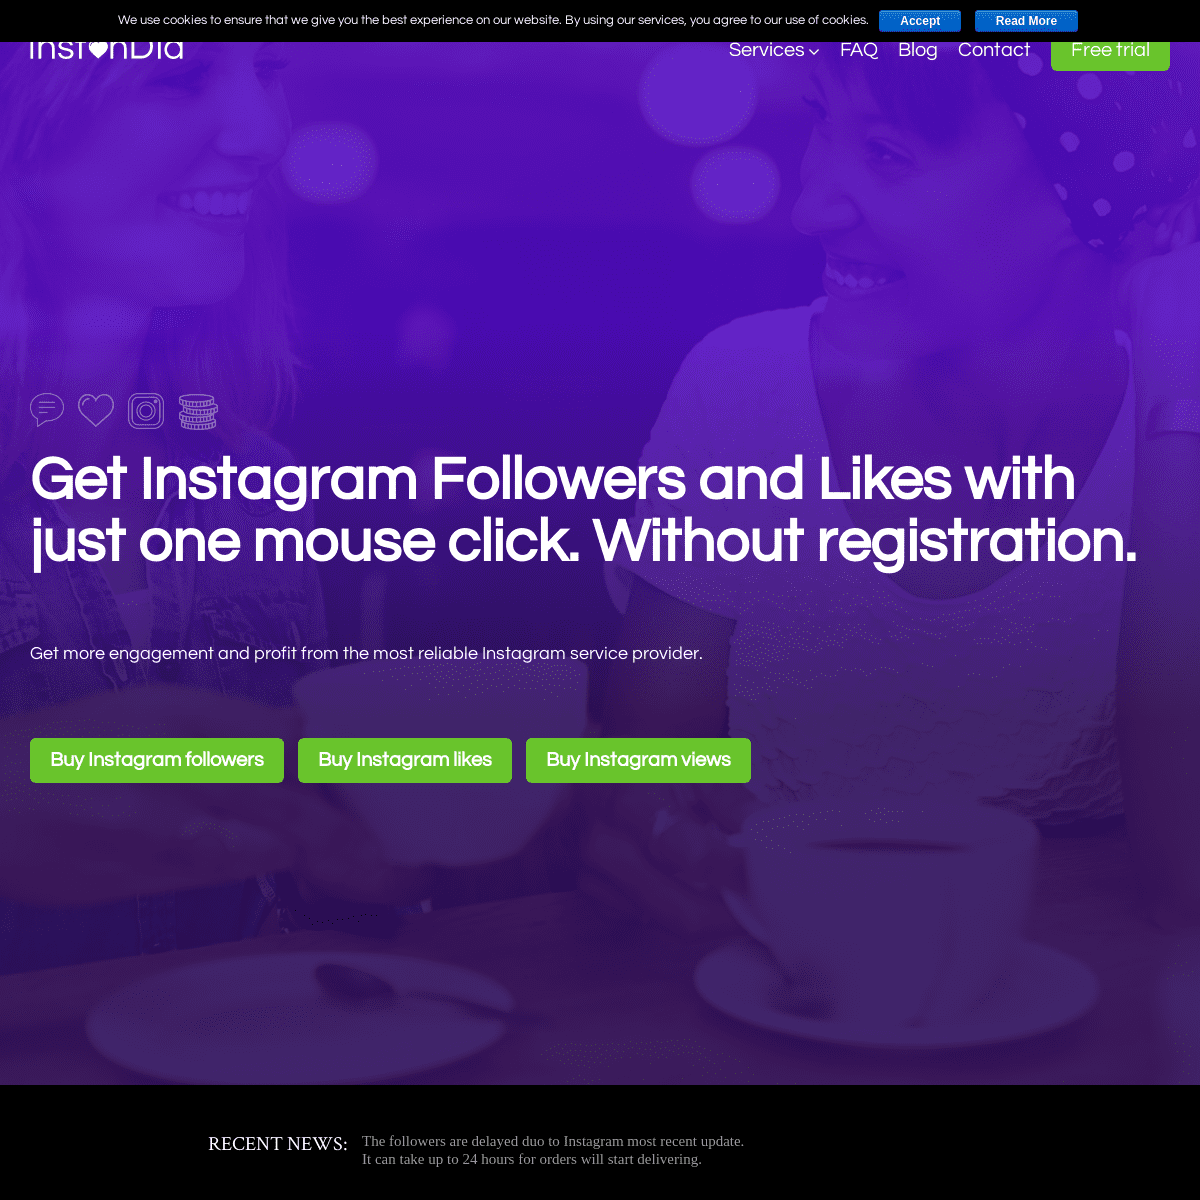 InstanDid - Buy Instagram Followers and Likes